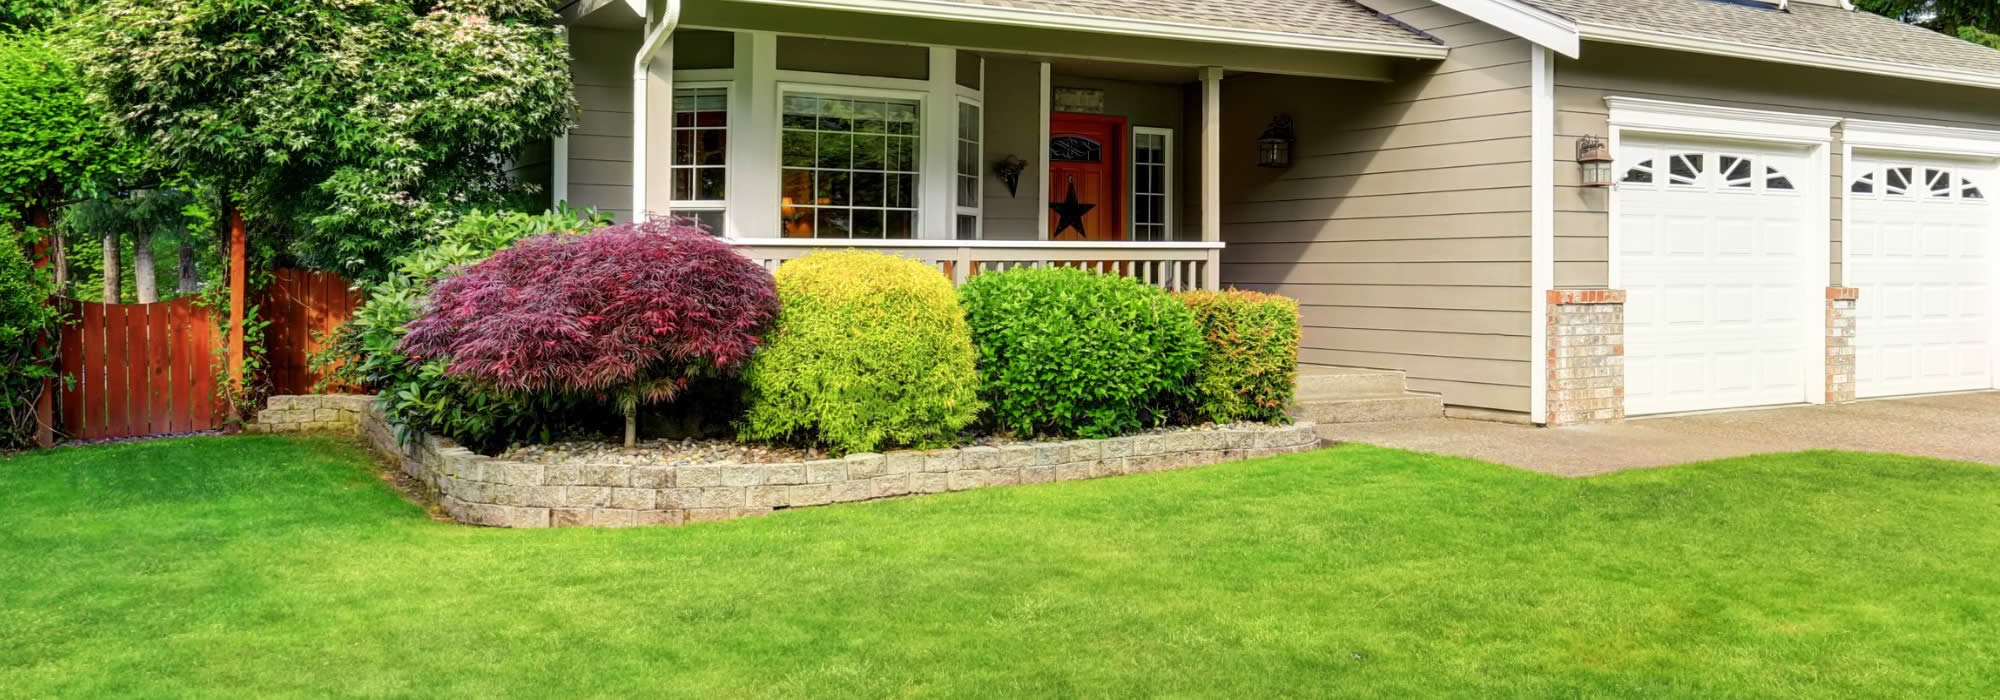 Landscaping Services in Oregon